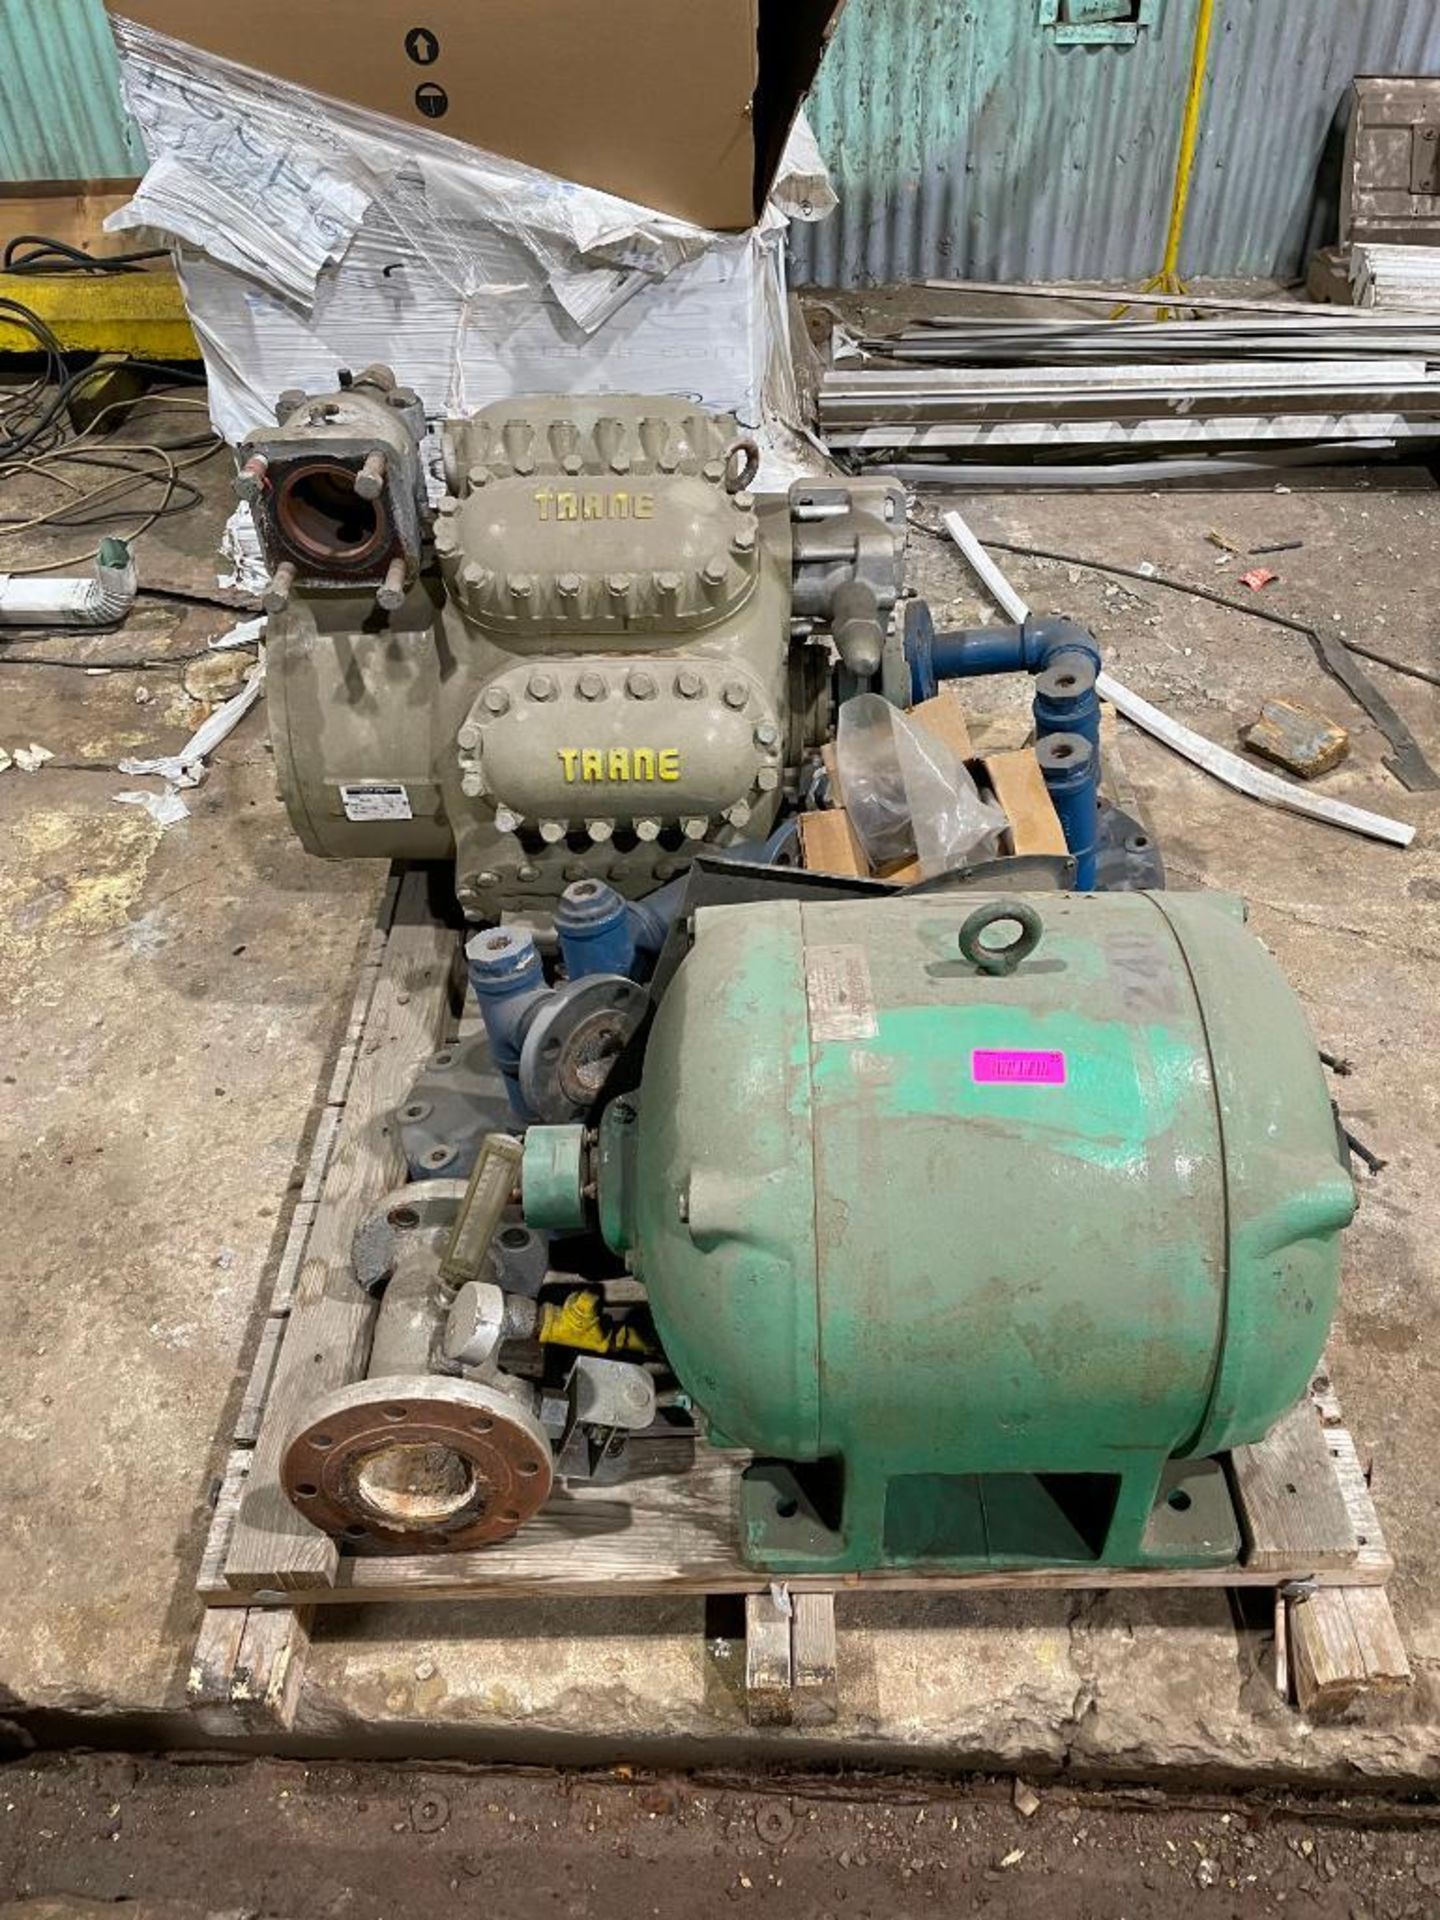 DESCRIPTION TRANE 2A518 COMPRESSOR & INDUCTION MOTOR AS SHOWN THIS LOT IS ONE MONEY QUANTITY 1 TRANE - Image 2 of 7